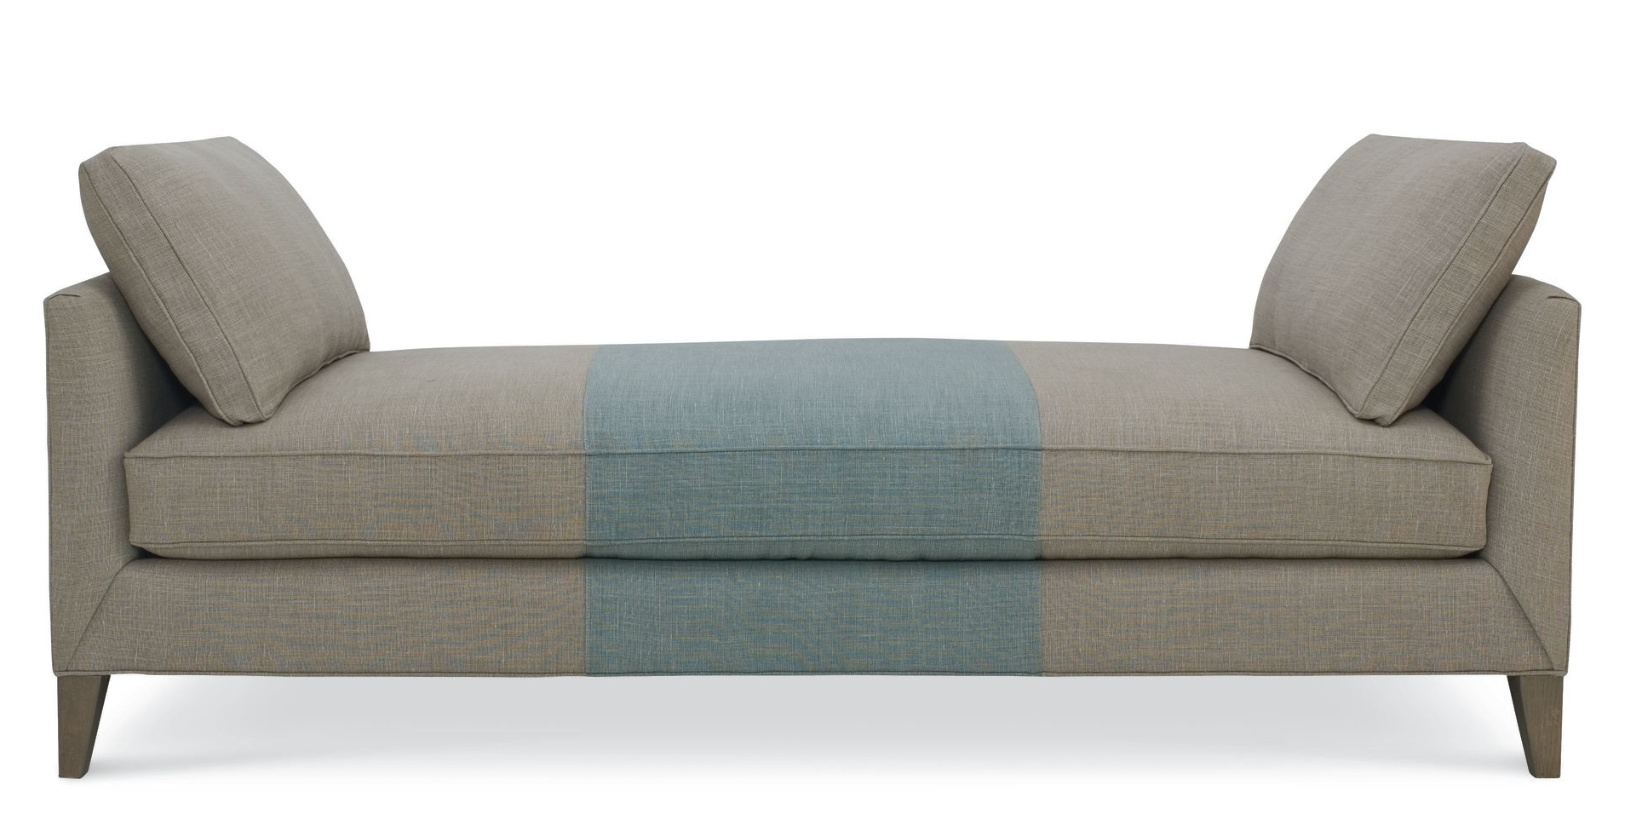 Friday Family-Friendly Find: CR Laine Liv Daybed | Interiors for Families